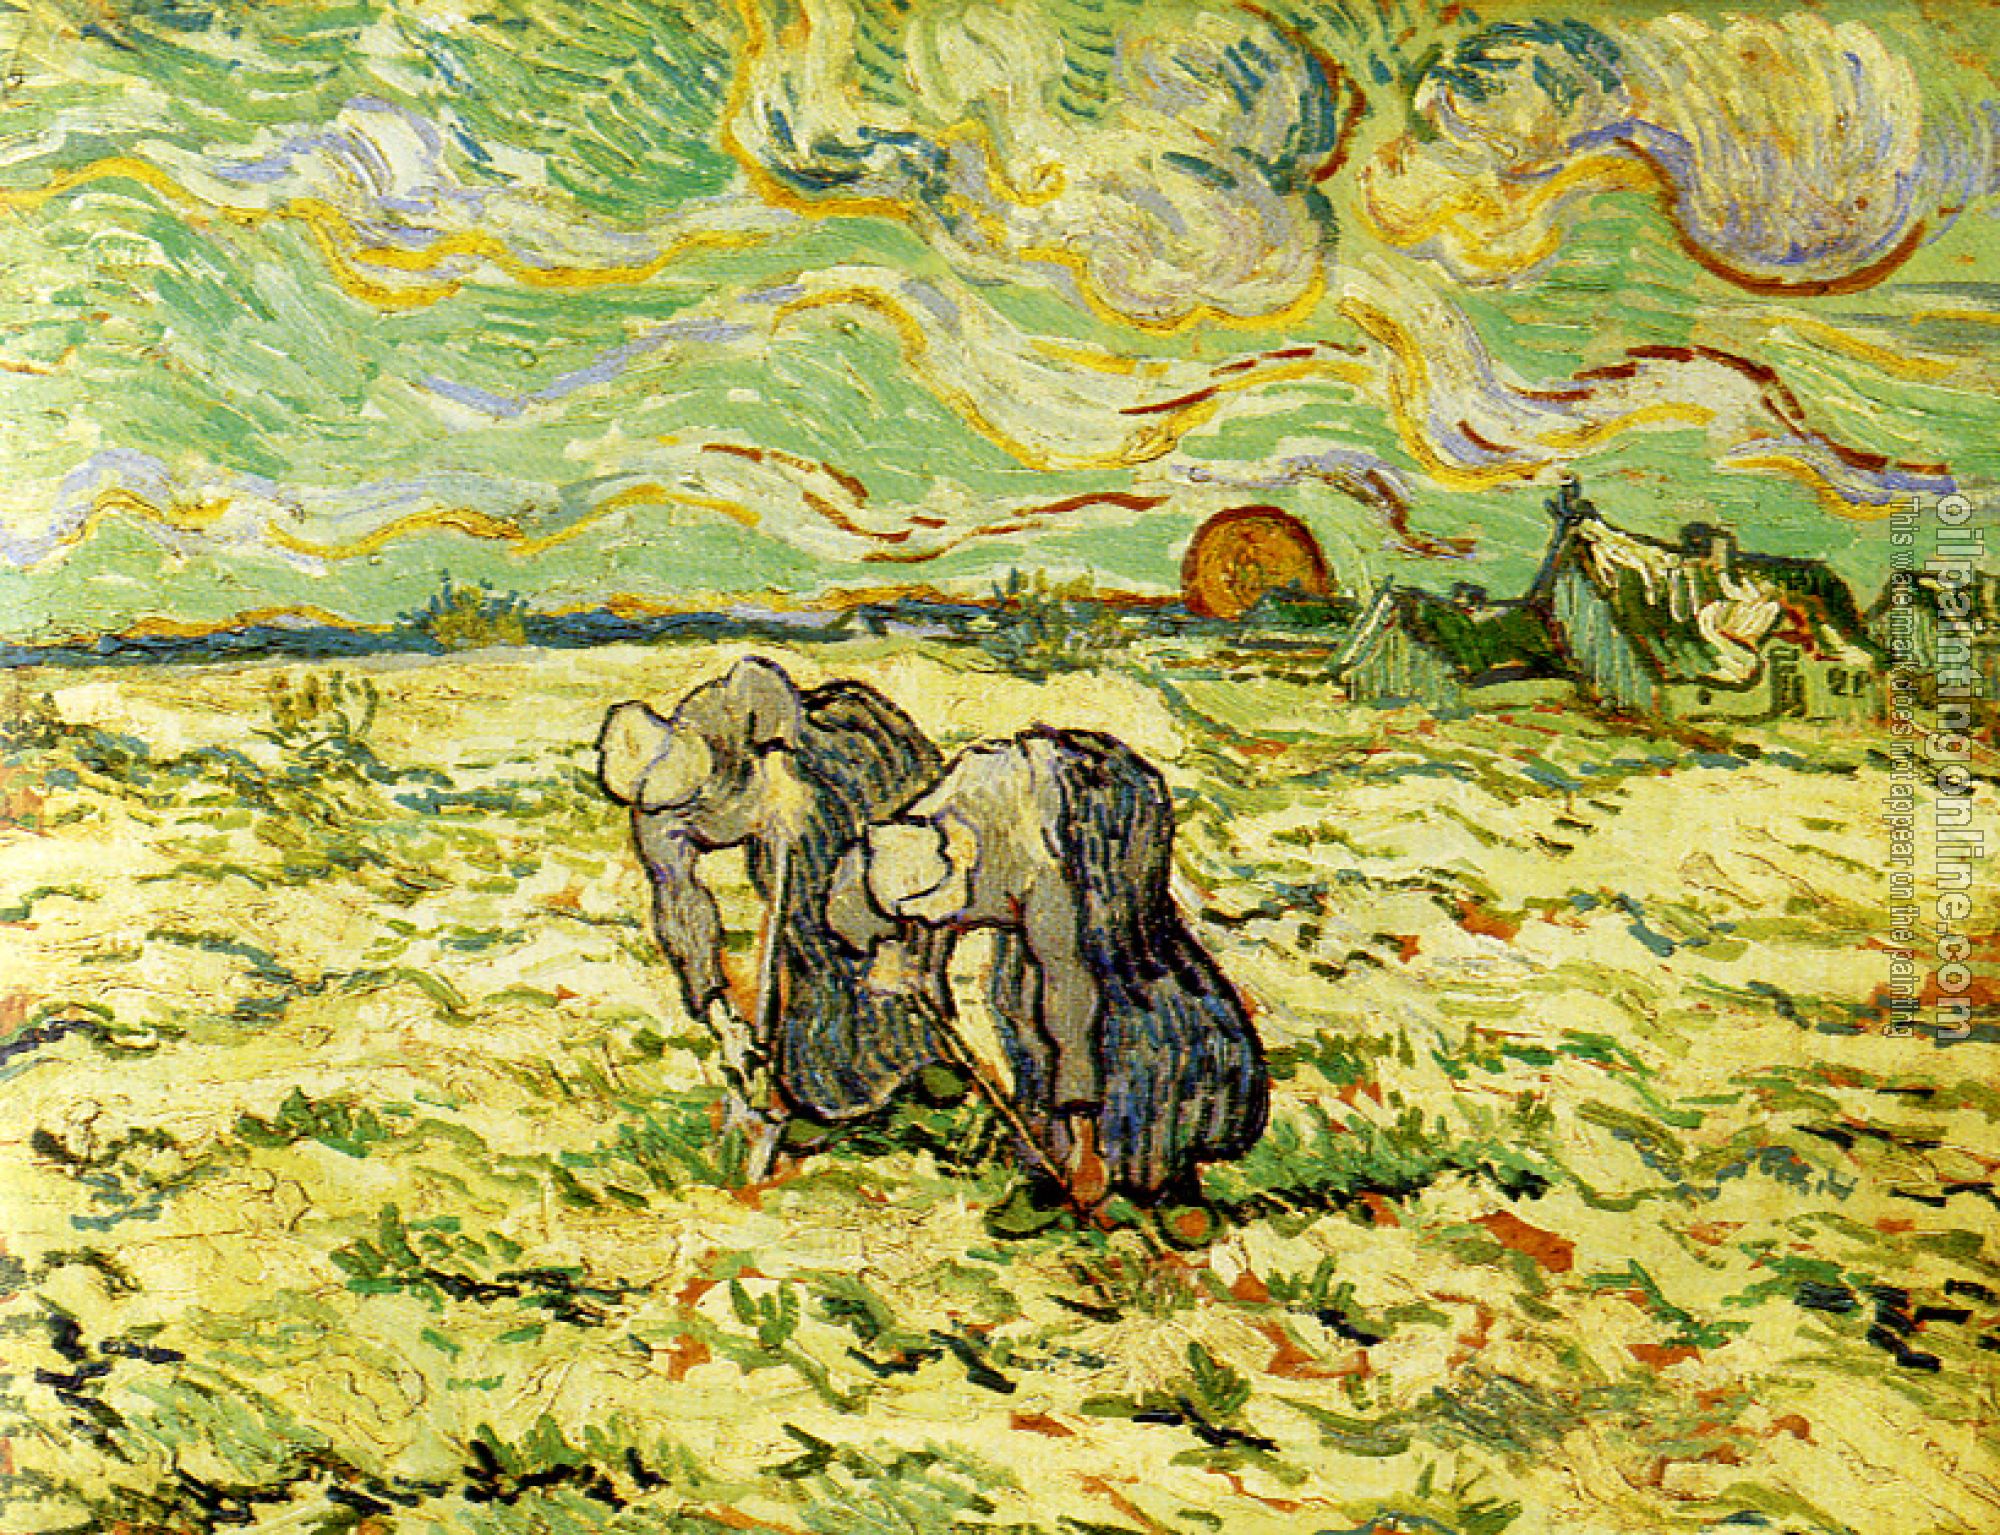 Gogh, Vincent van - Two Peasant Women Digging in a Snow-Covered Field at Sunset